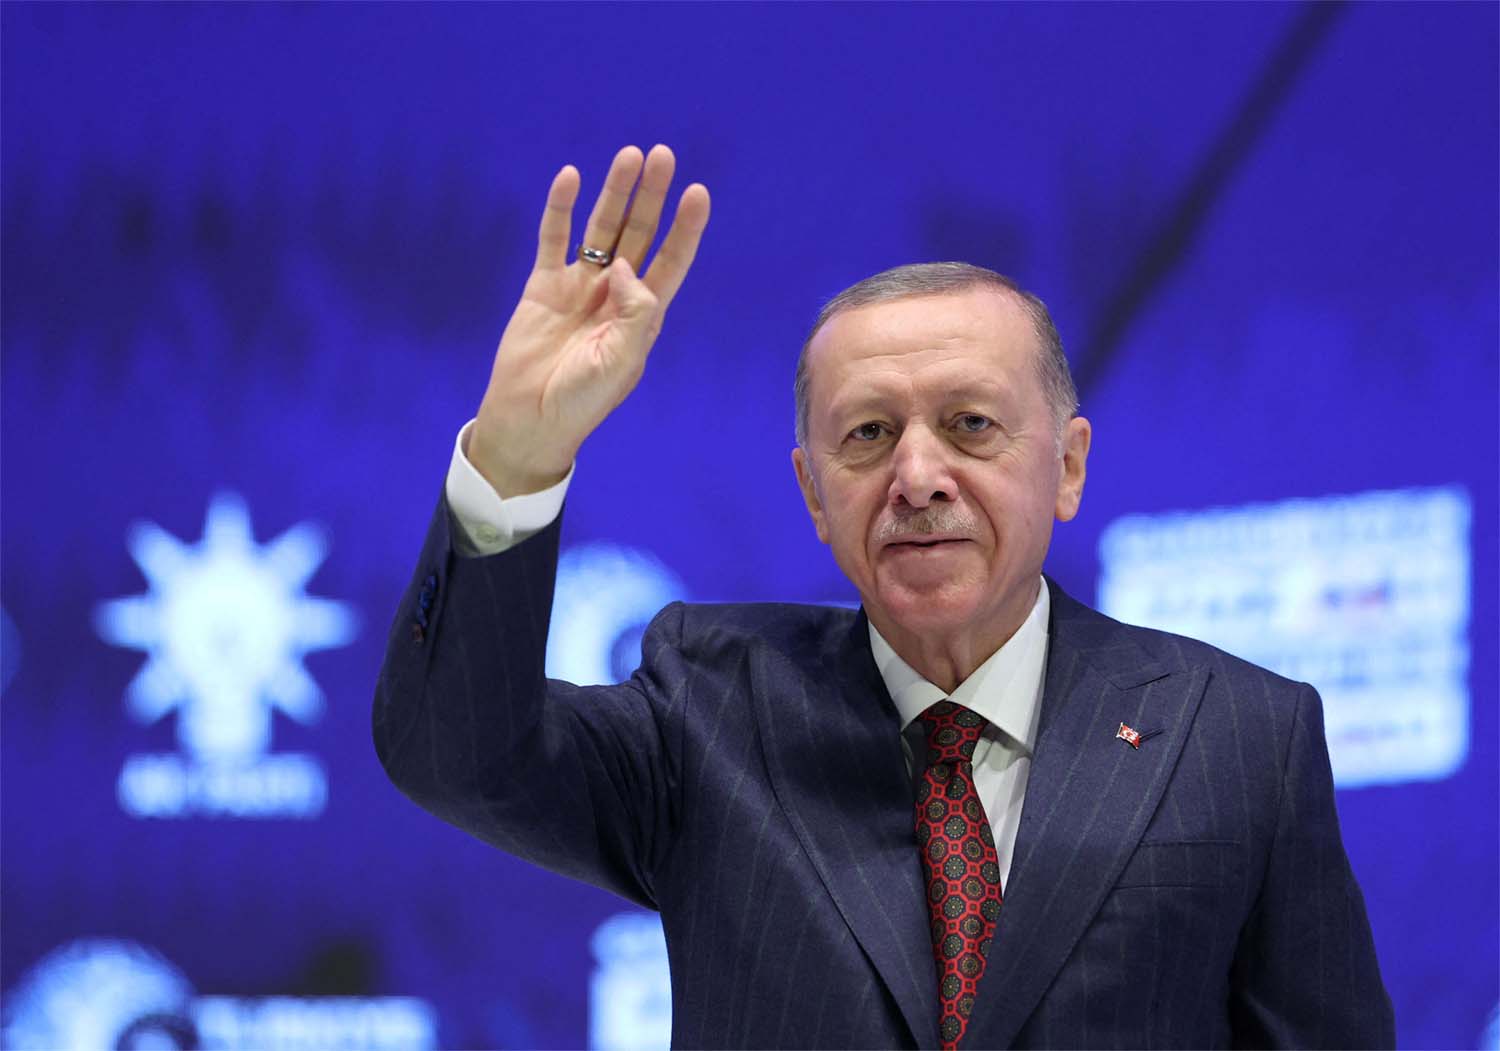 Erdogan: We will dry the roots of sneaky acts aiming to destroy our family institution